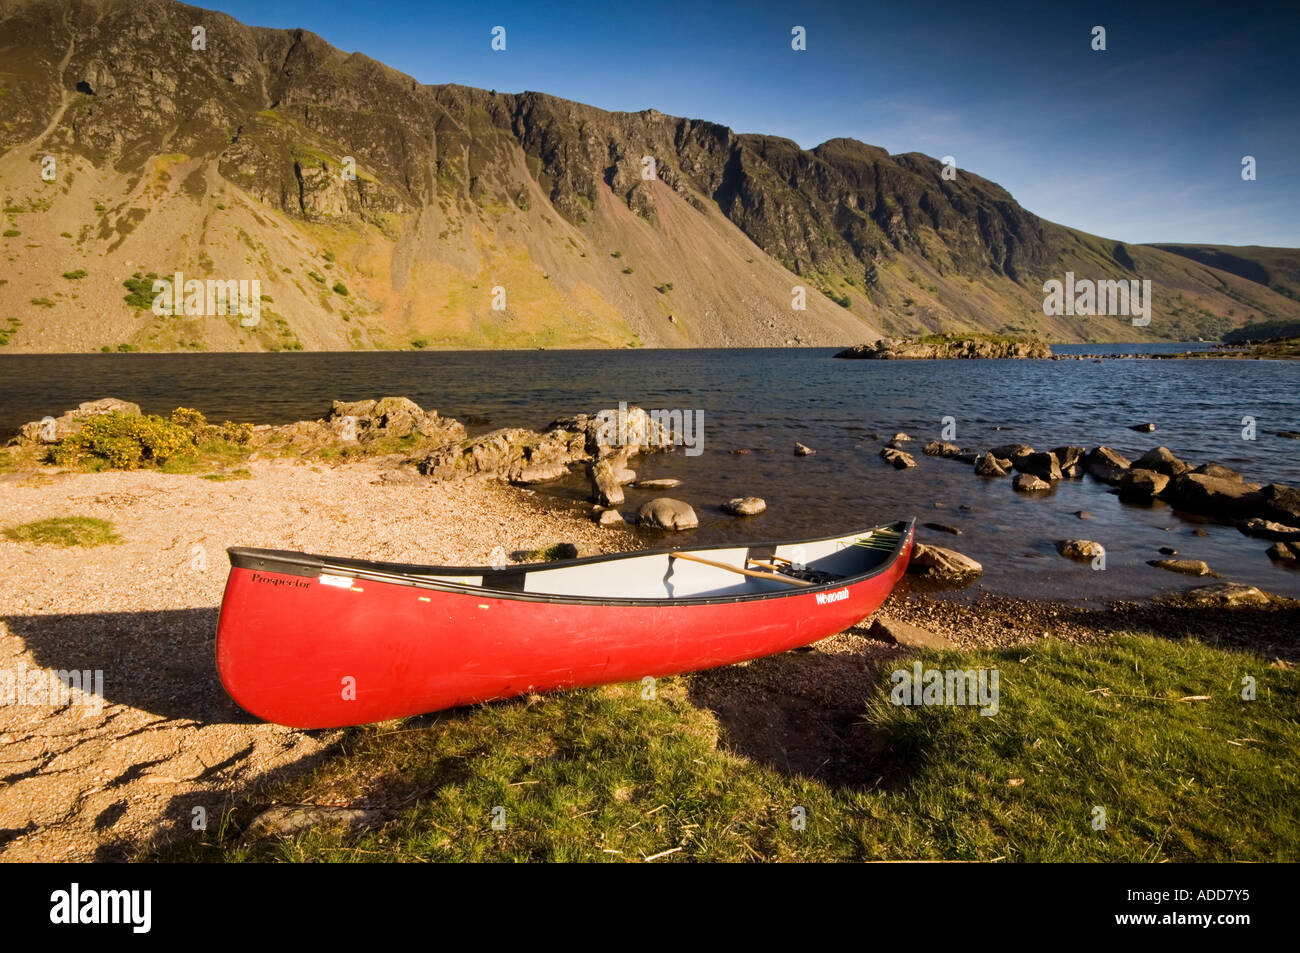 Red Boat on the Shore of Wastwater Below The Screes, Wastwater, The Lake District, Cumbria, England, UK Stock Photo